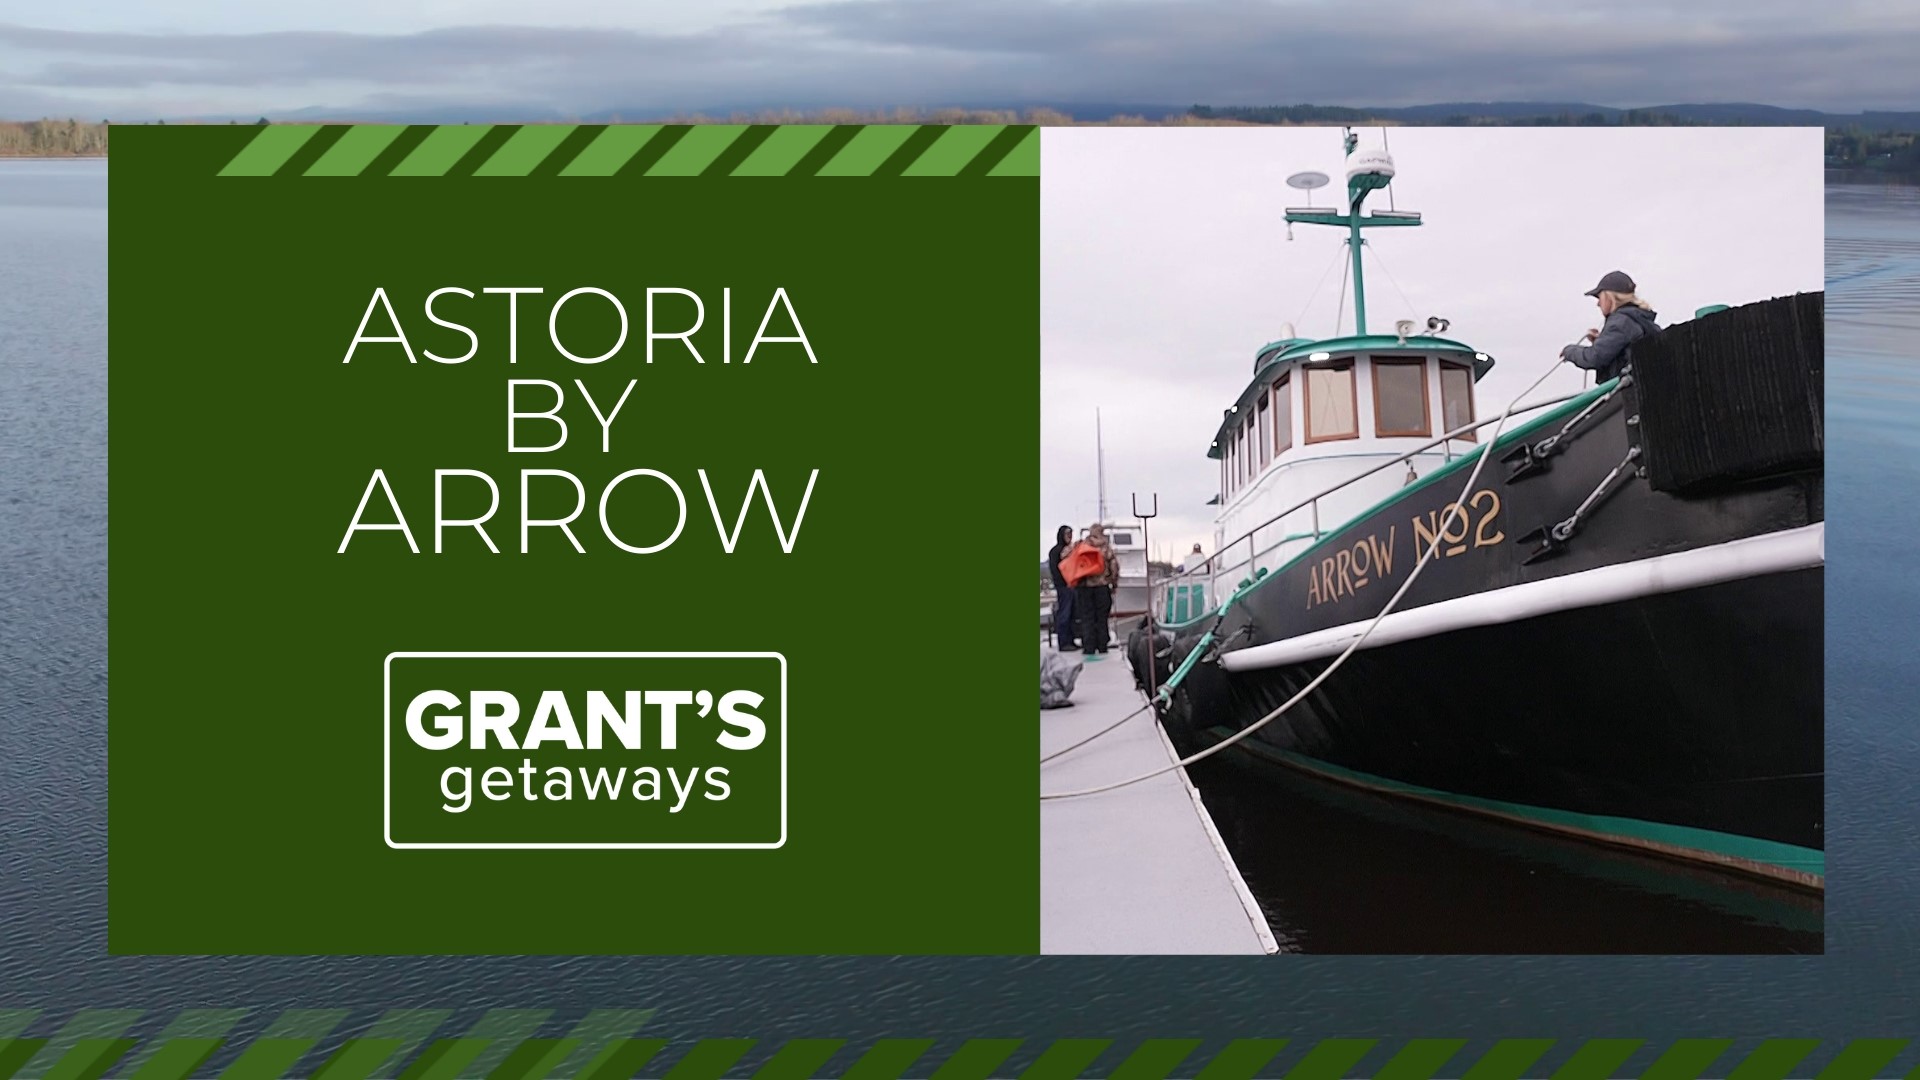 Visitors and locals can experience Astoria from the river on The Arrow, a former working boat that now offers excursions along the waterfront.